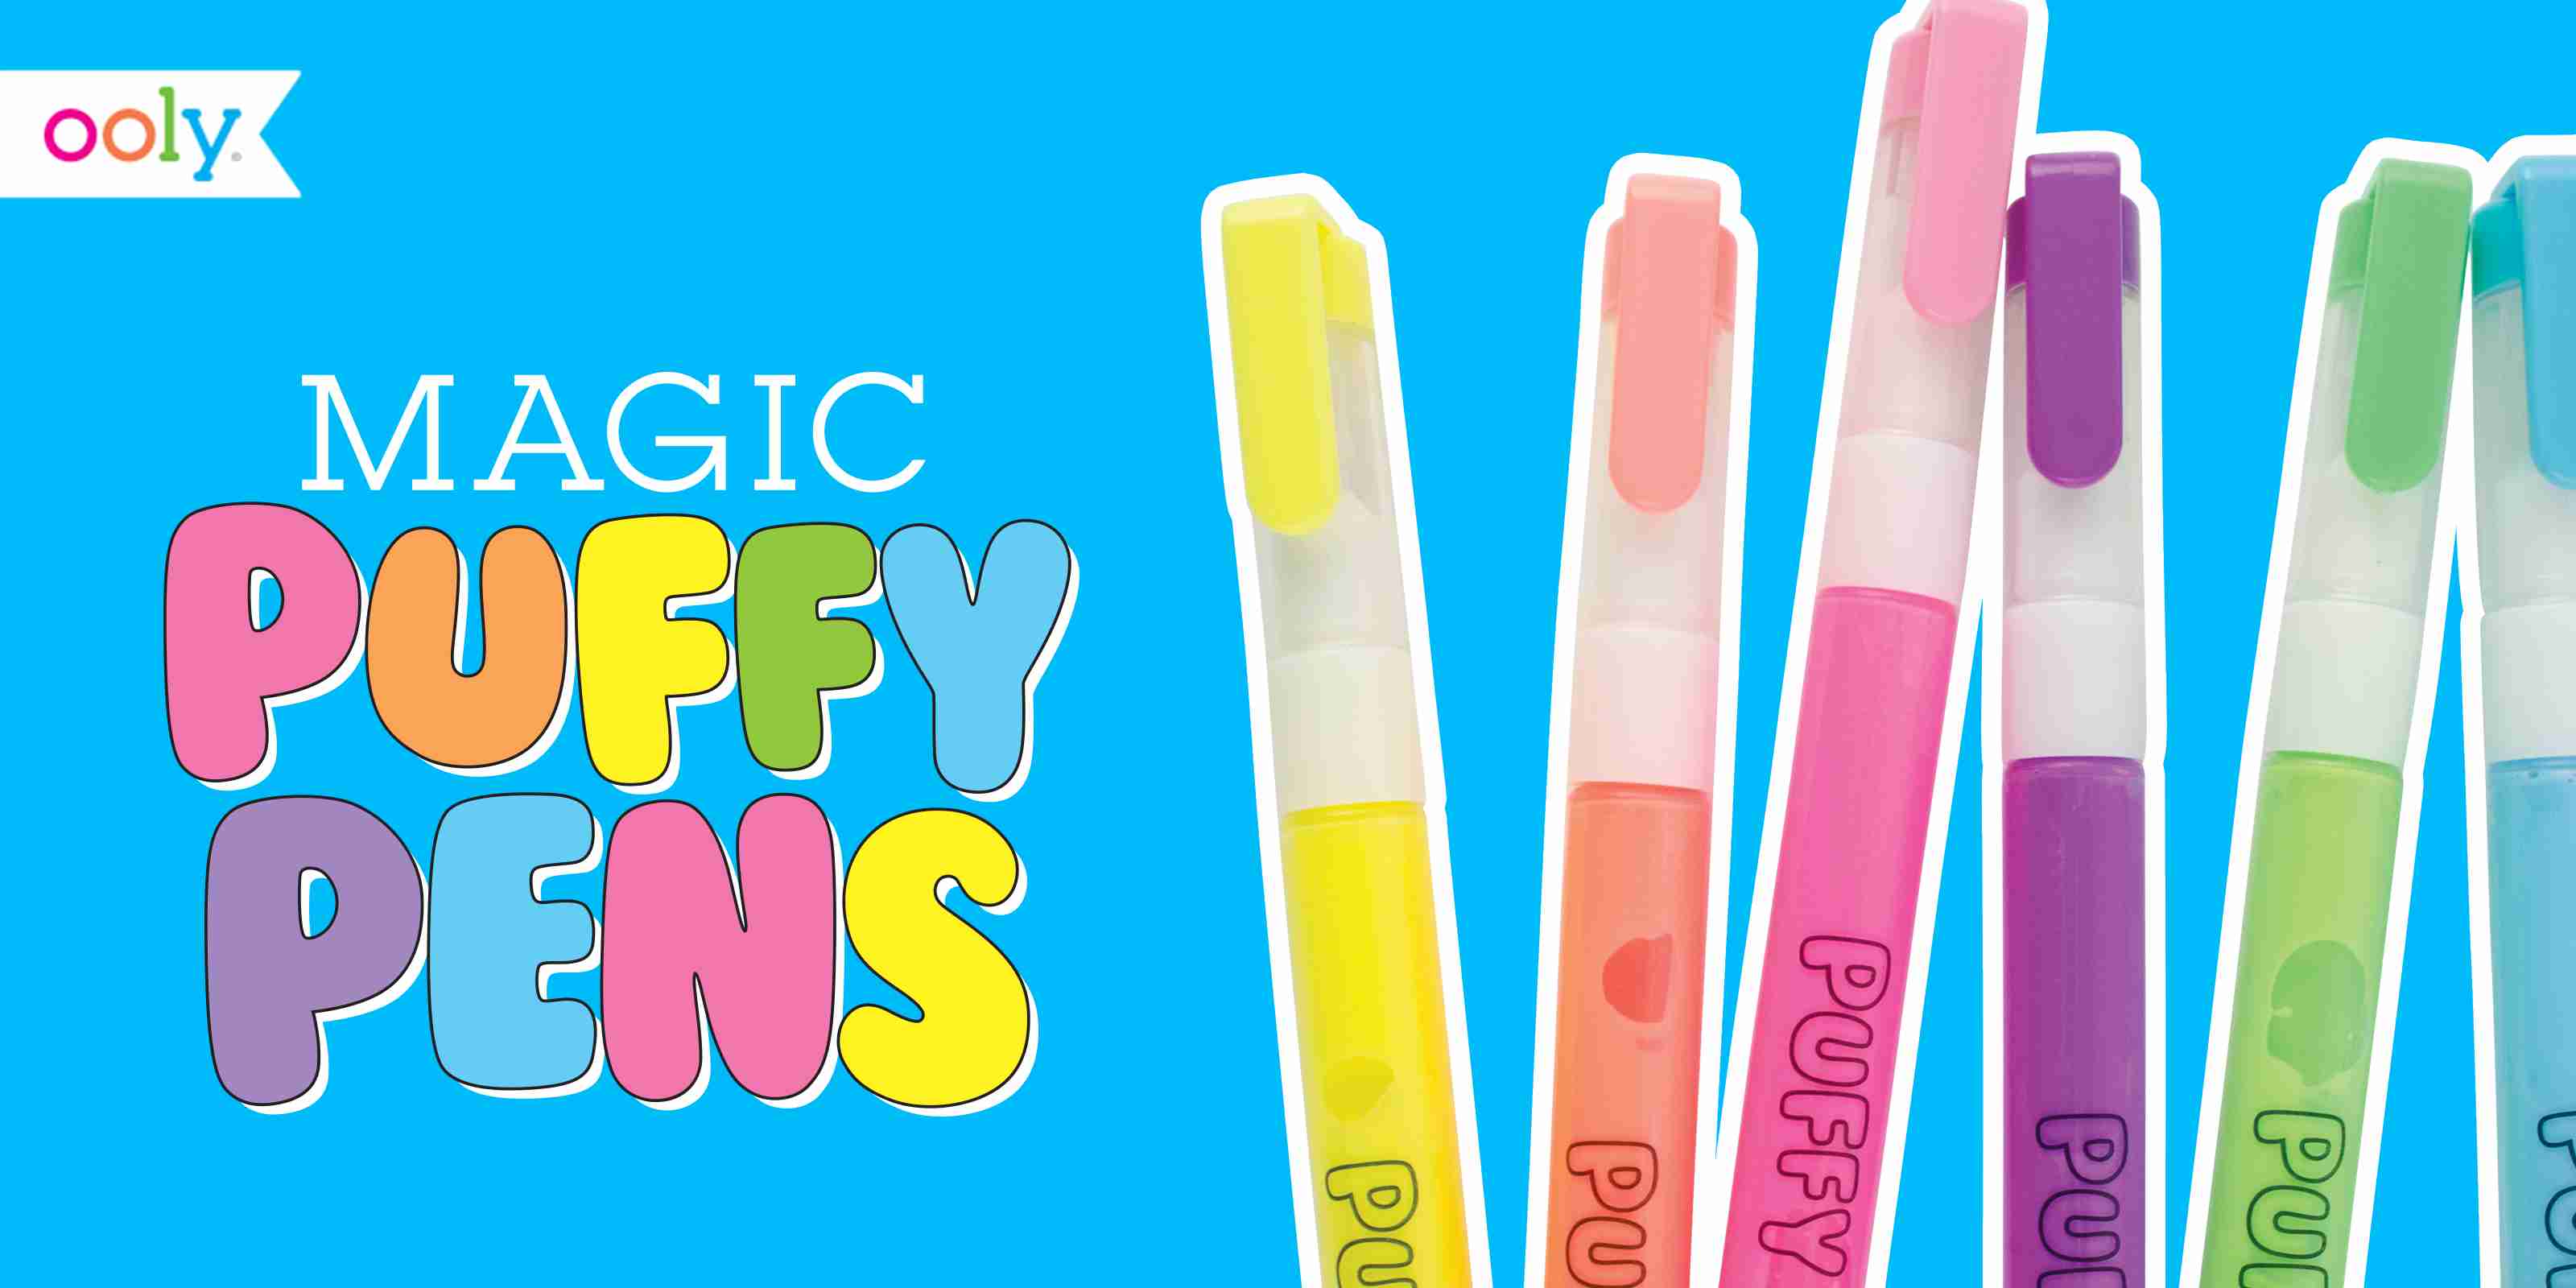 ooly magic neon puffy pens - Little